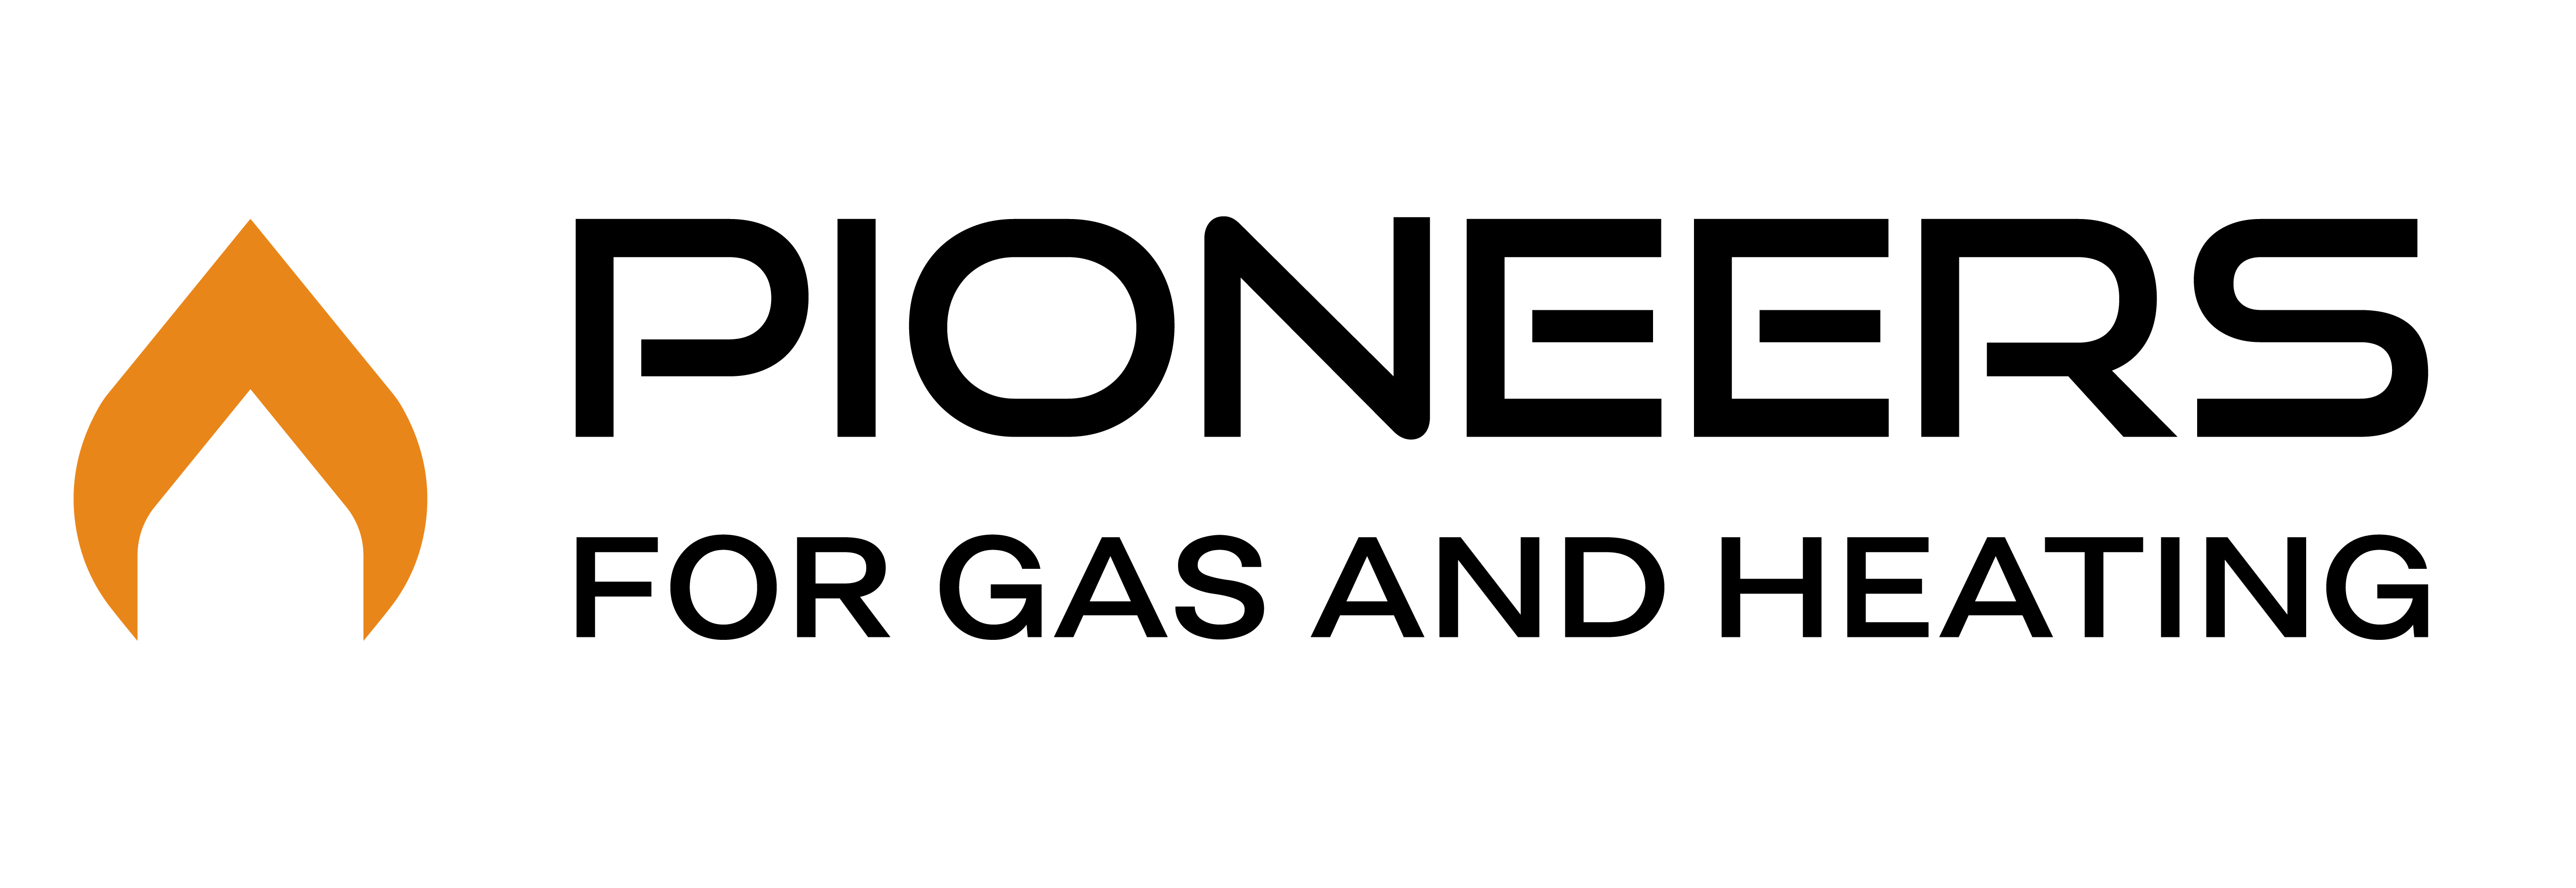 Pioneers for gas and heating ltd